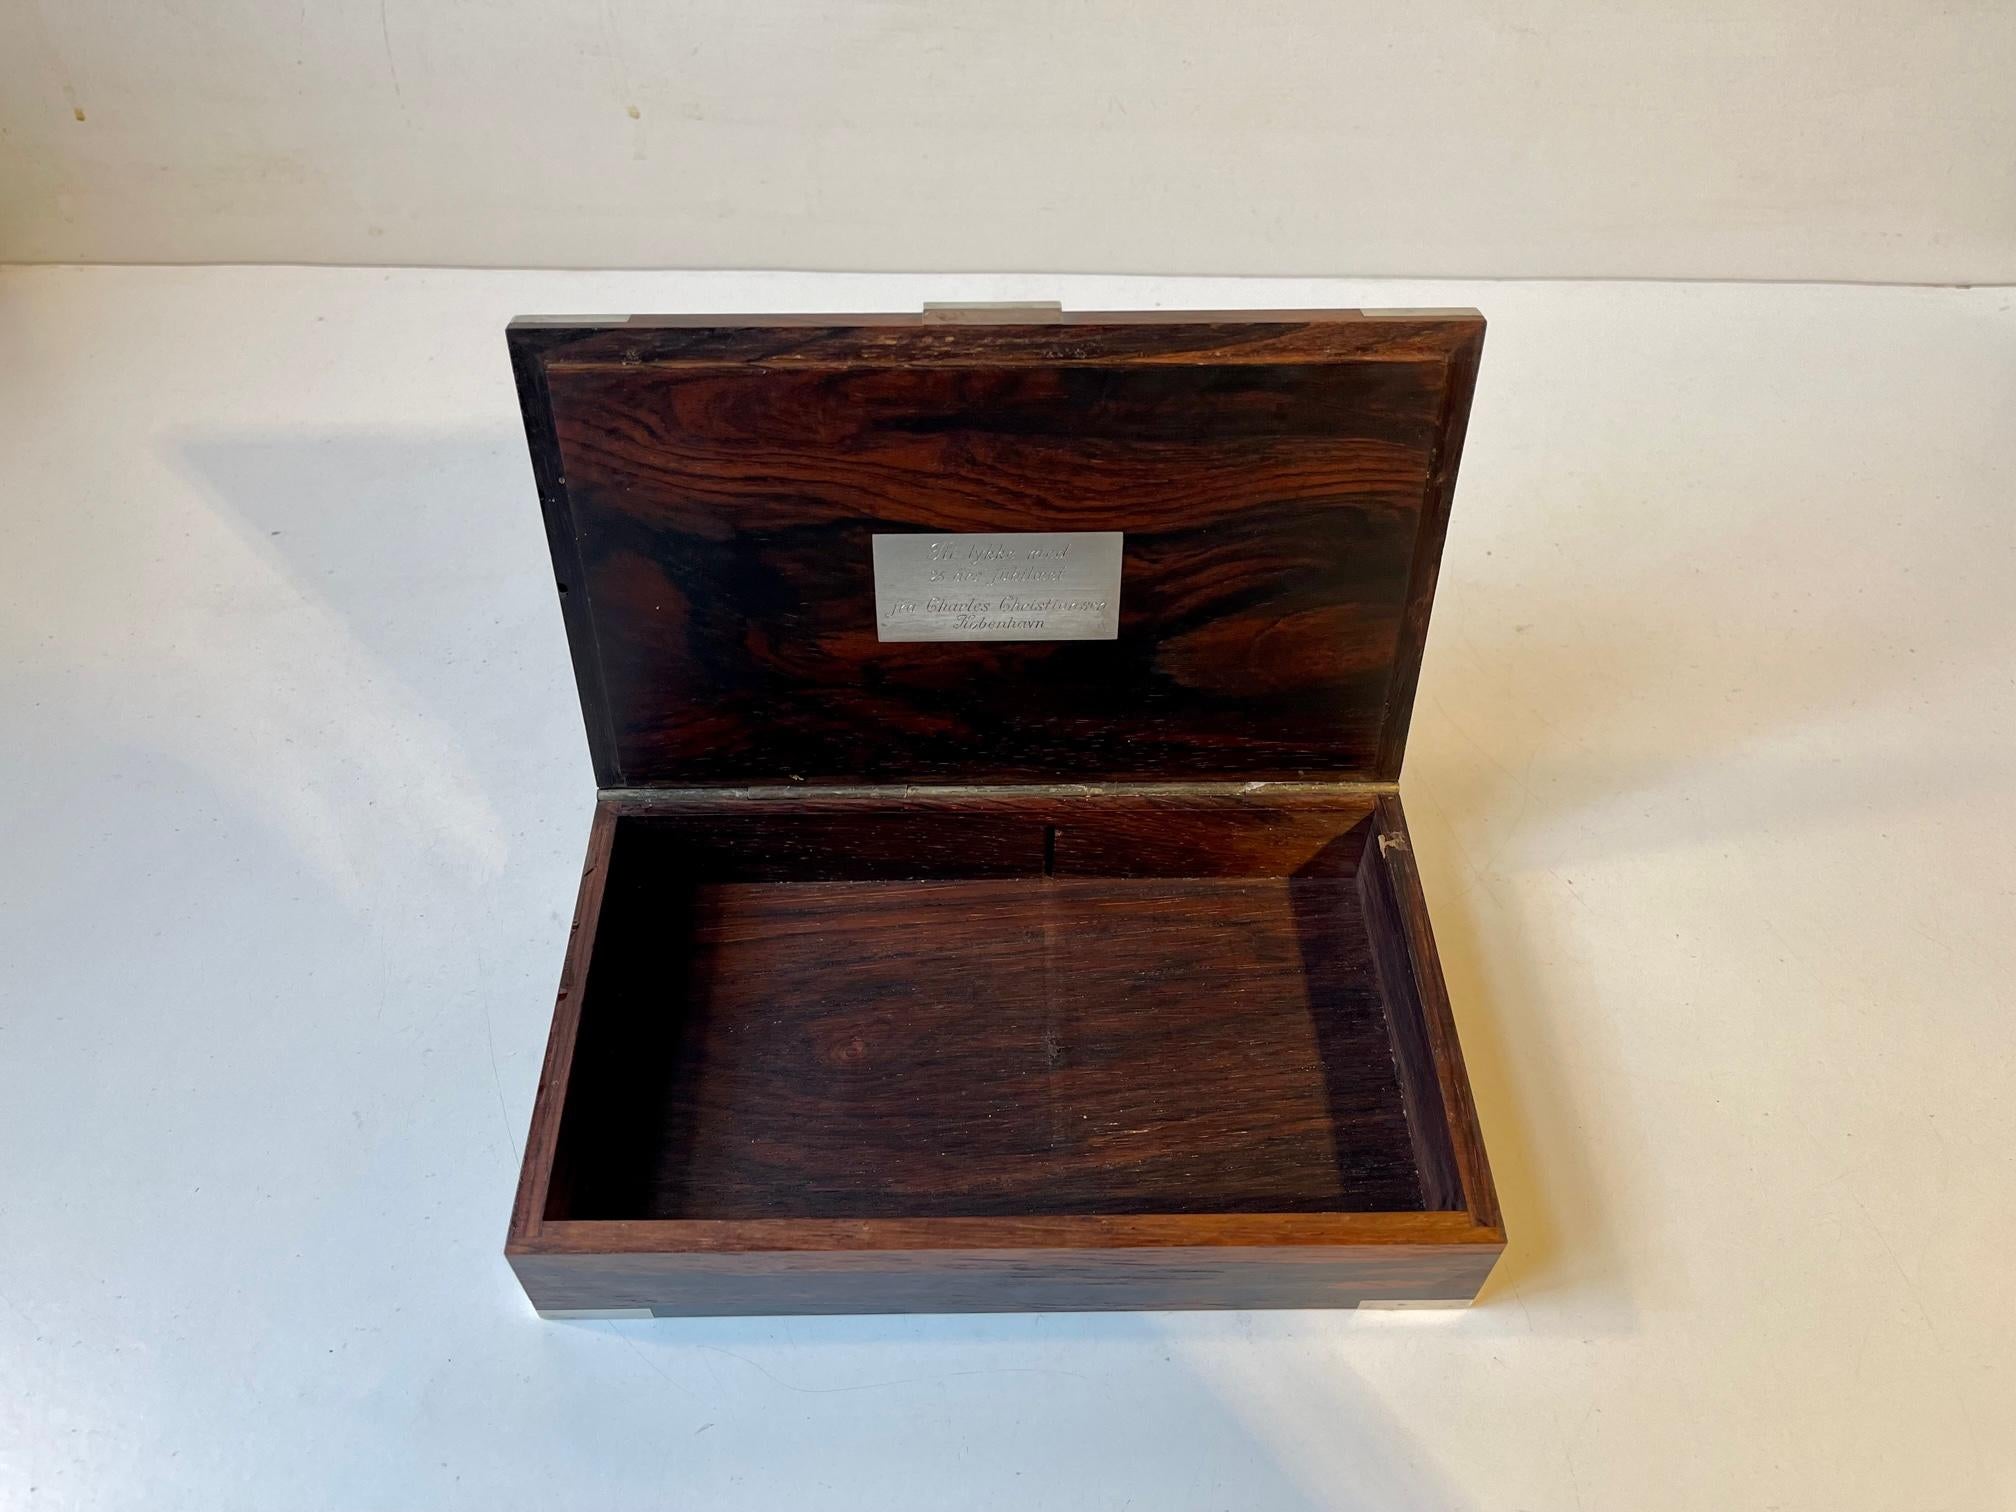 Hans Hansen Danish Modern Cigar Box in Rosewood and Sterling Silver, 1950s For Sale 2